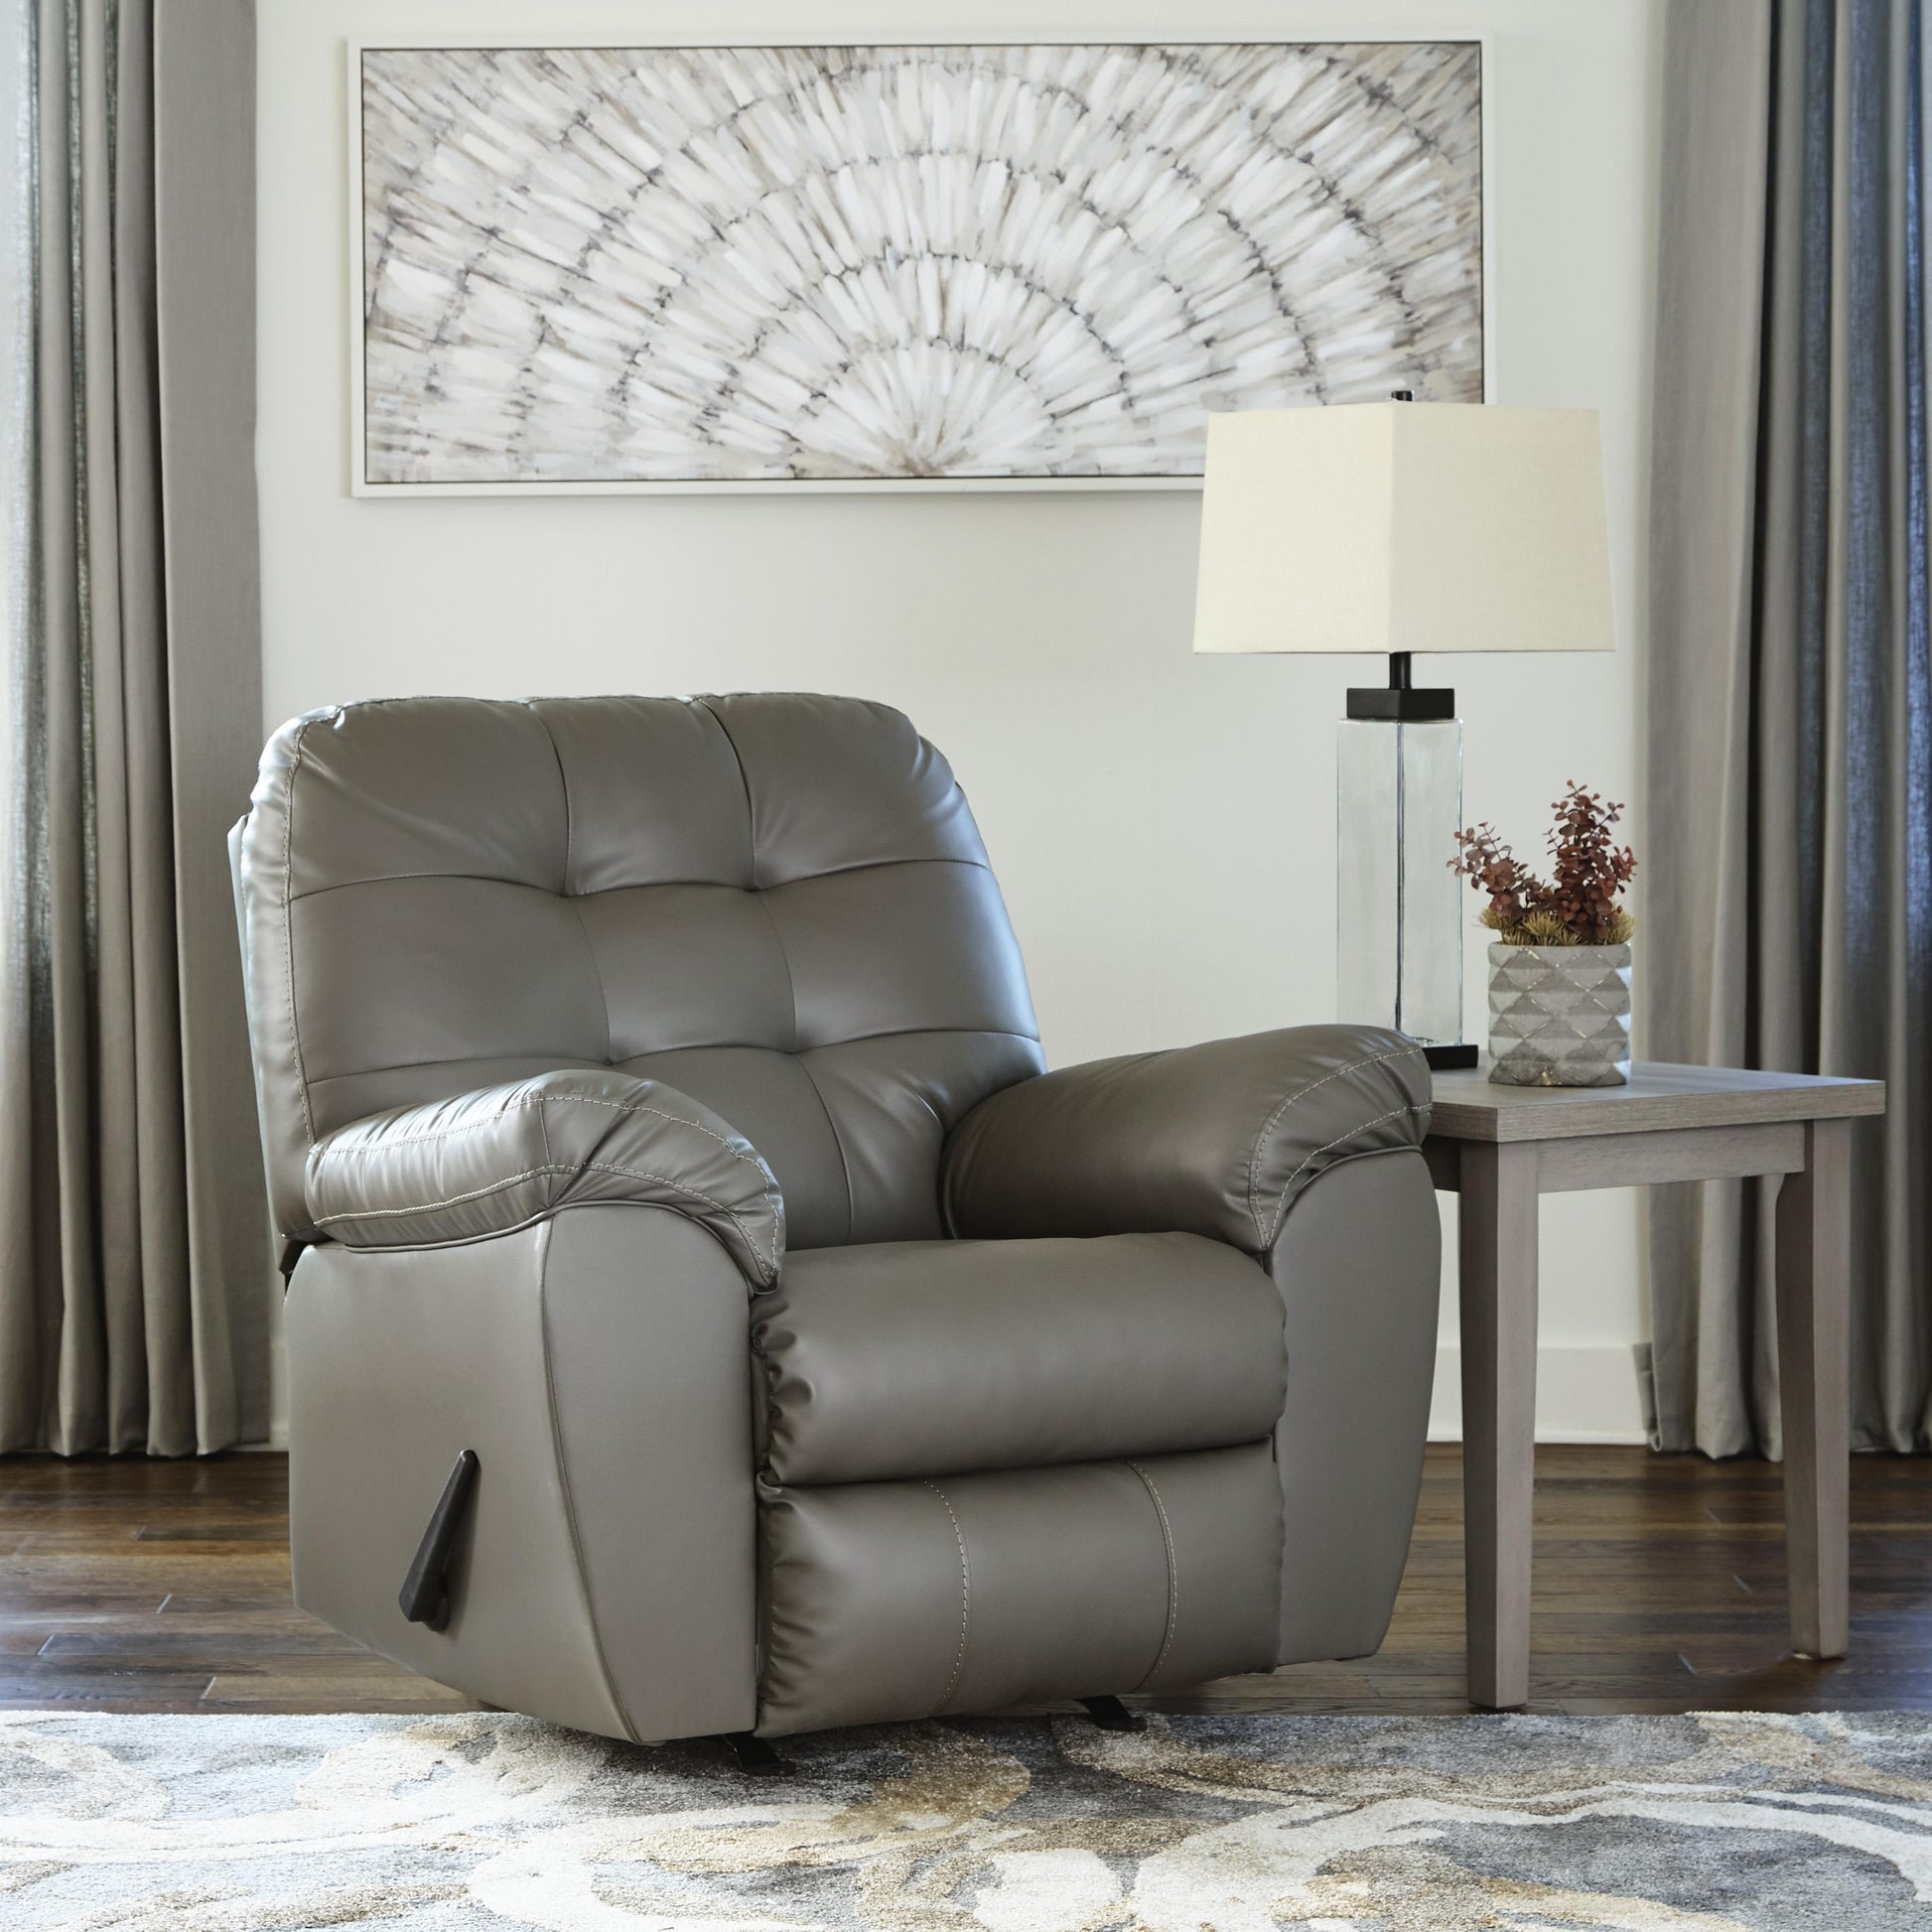 Signature Design by Ashley Donlen Rocker Leather Look Recliner 5970225 IMAGE 6